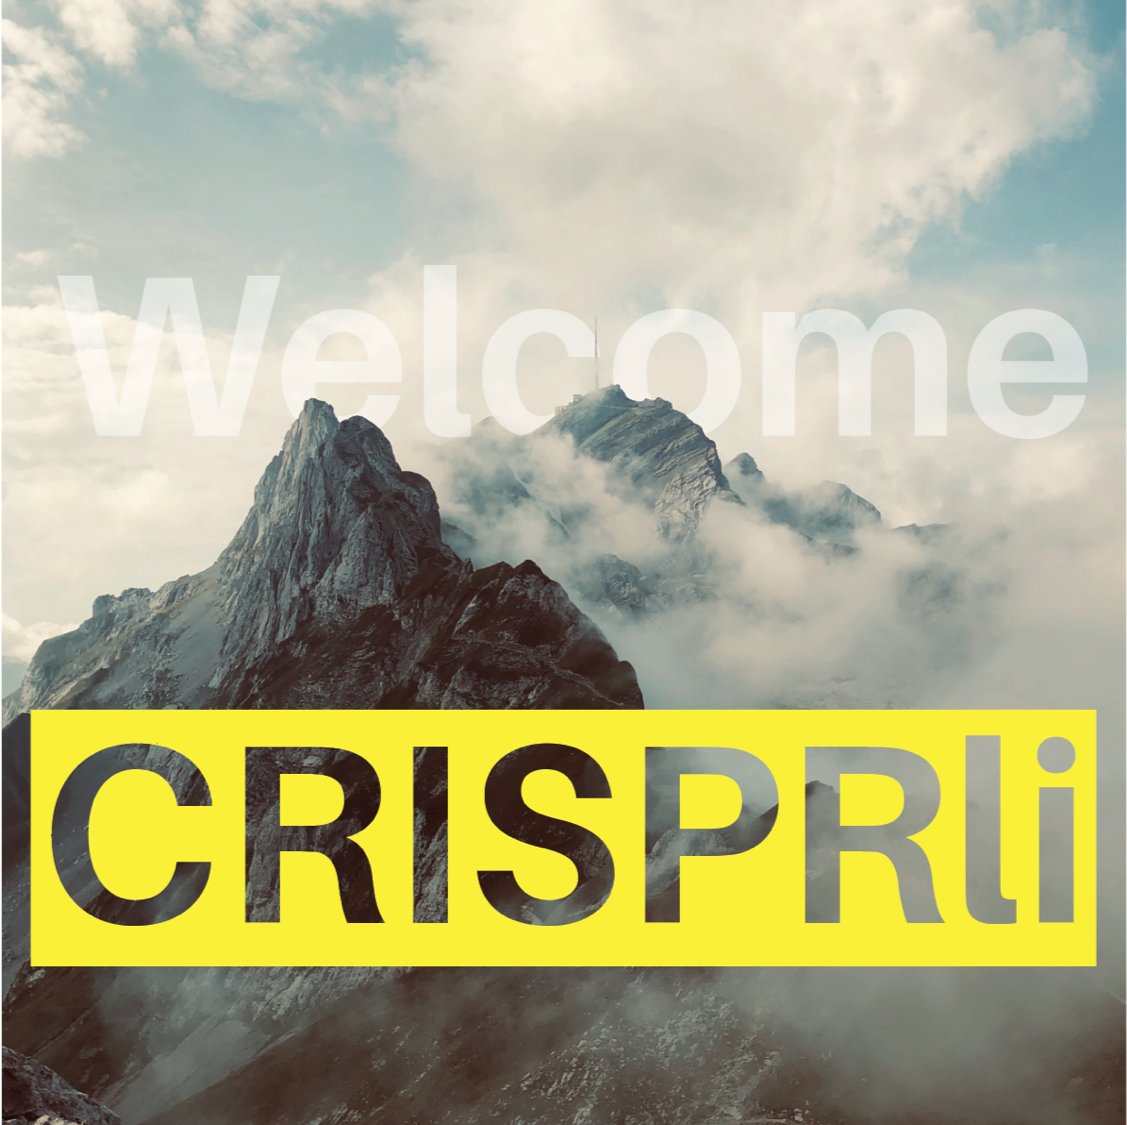 🎙️Excited to launch my new podcast #CRISPRli, a deep dive into the revolutionary world of #CRISPR.  I'll be hosting interviews with top genome editing experts. Ideal for scientists, students or anyone curious about this cutting-edge tech. #GeneEditing
open.spotify.com/show/1NDD79fy2…